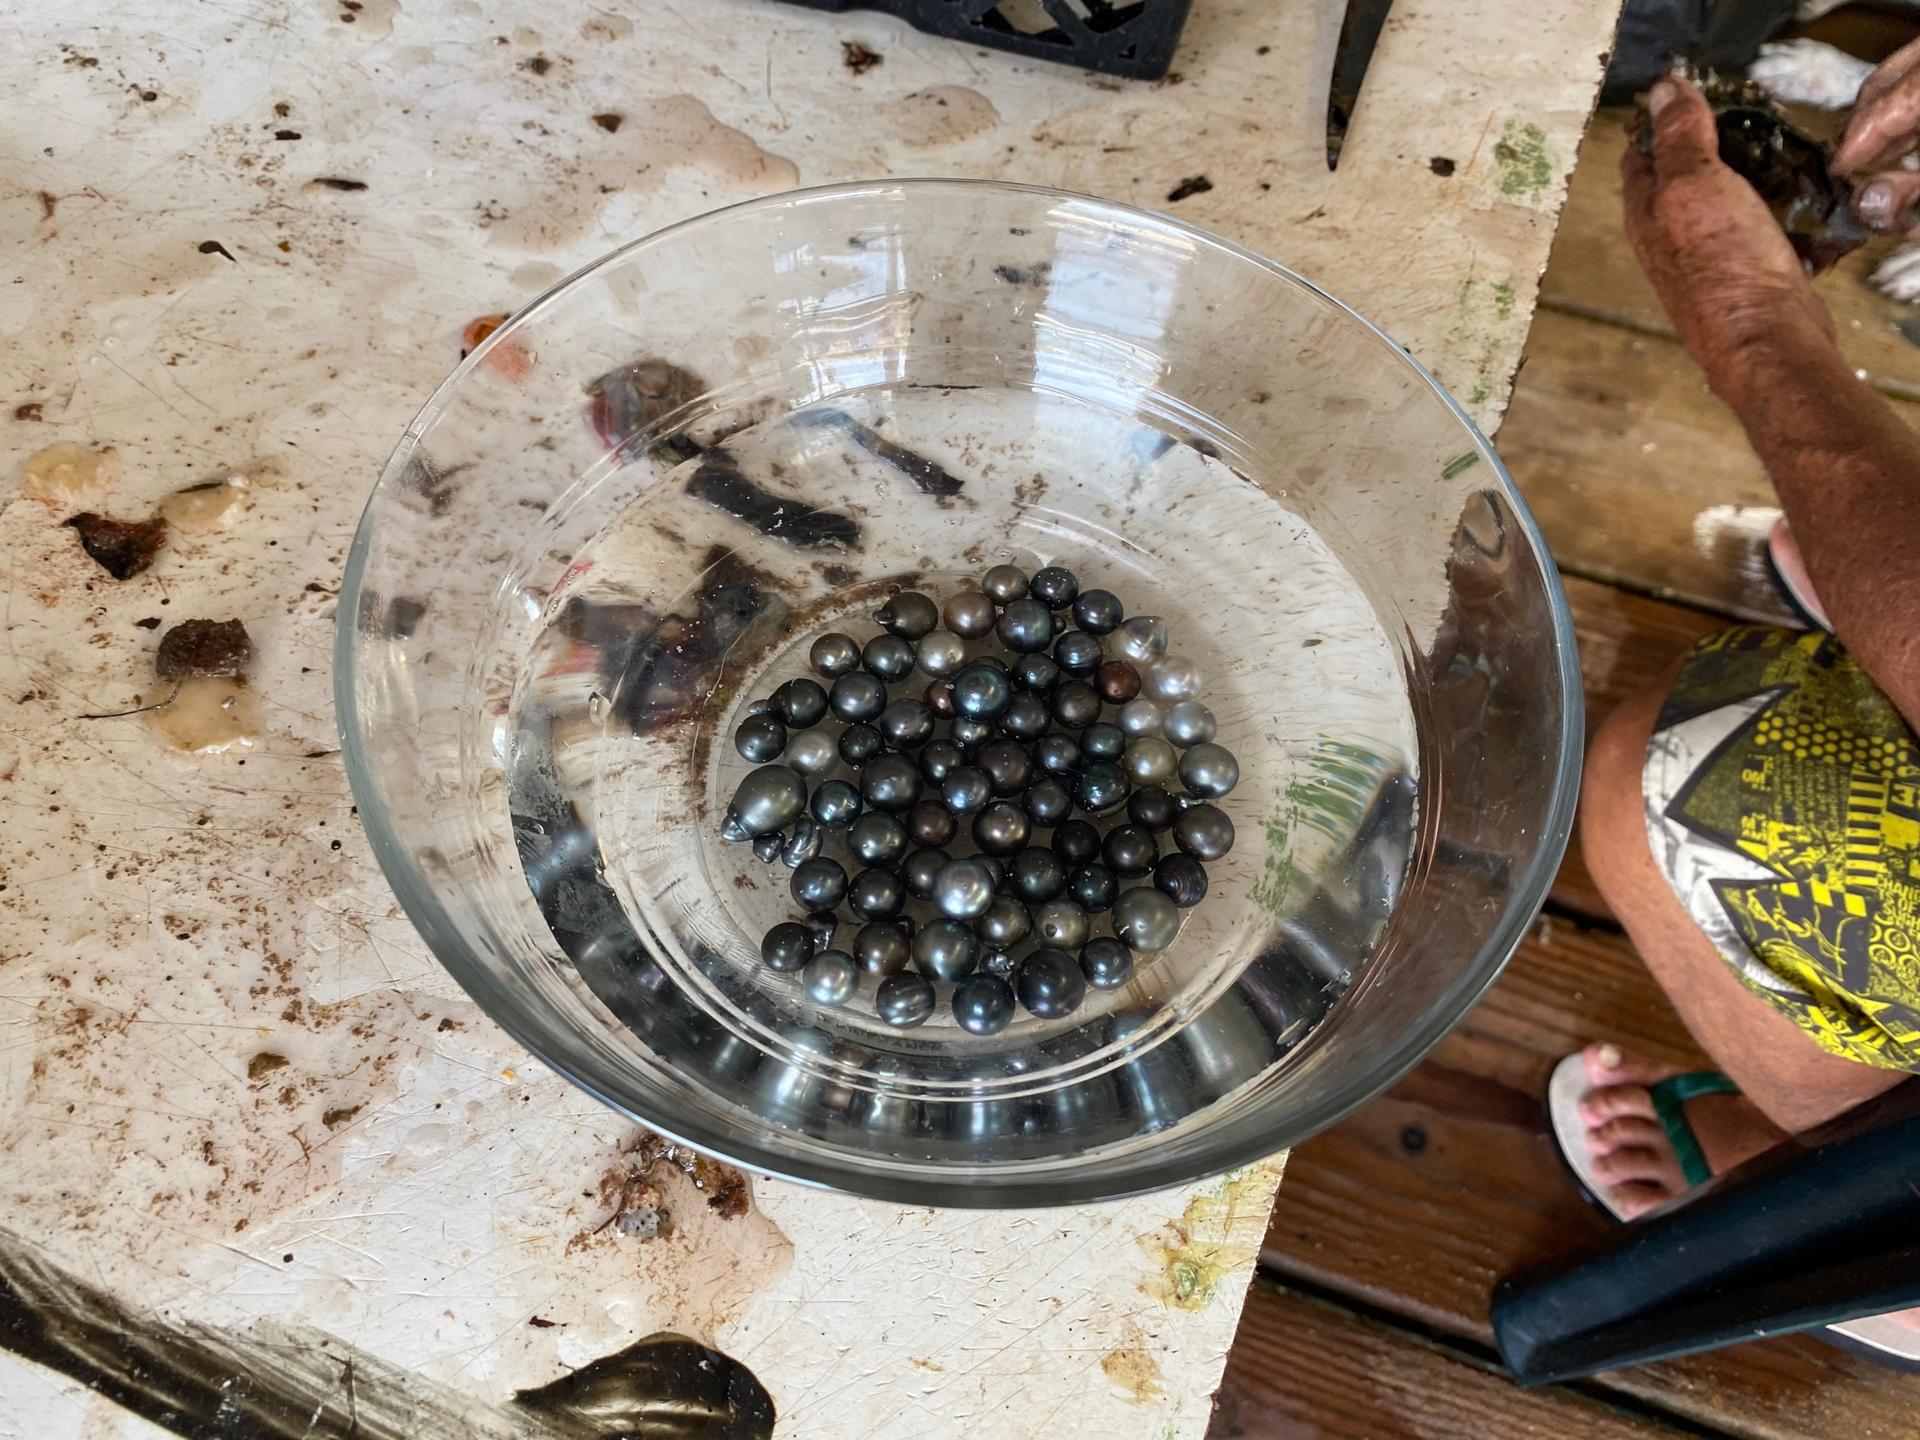 Newly harvested, cultured pearls sit in a bowl waiting to be cleaned again, and then counted and sorted. Kamoka Pearl Farm owners say they can sell a single pearl for $5 to $10,000 depending on a pearl's size, shape, quality and luster. 